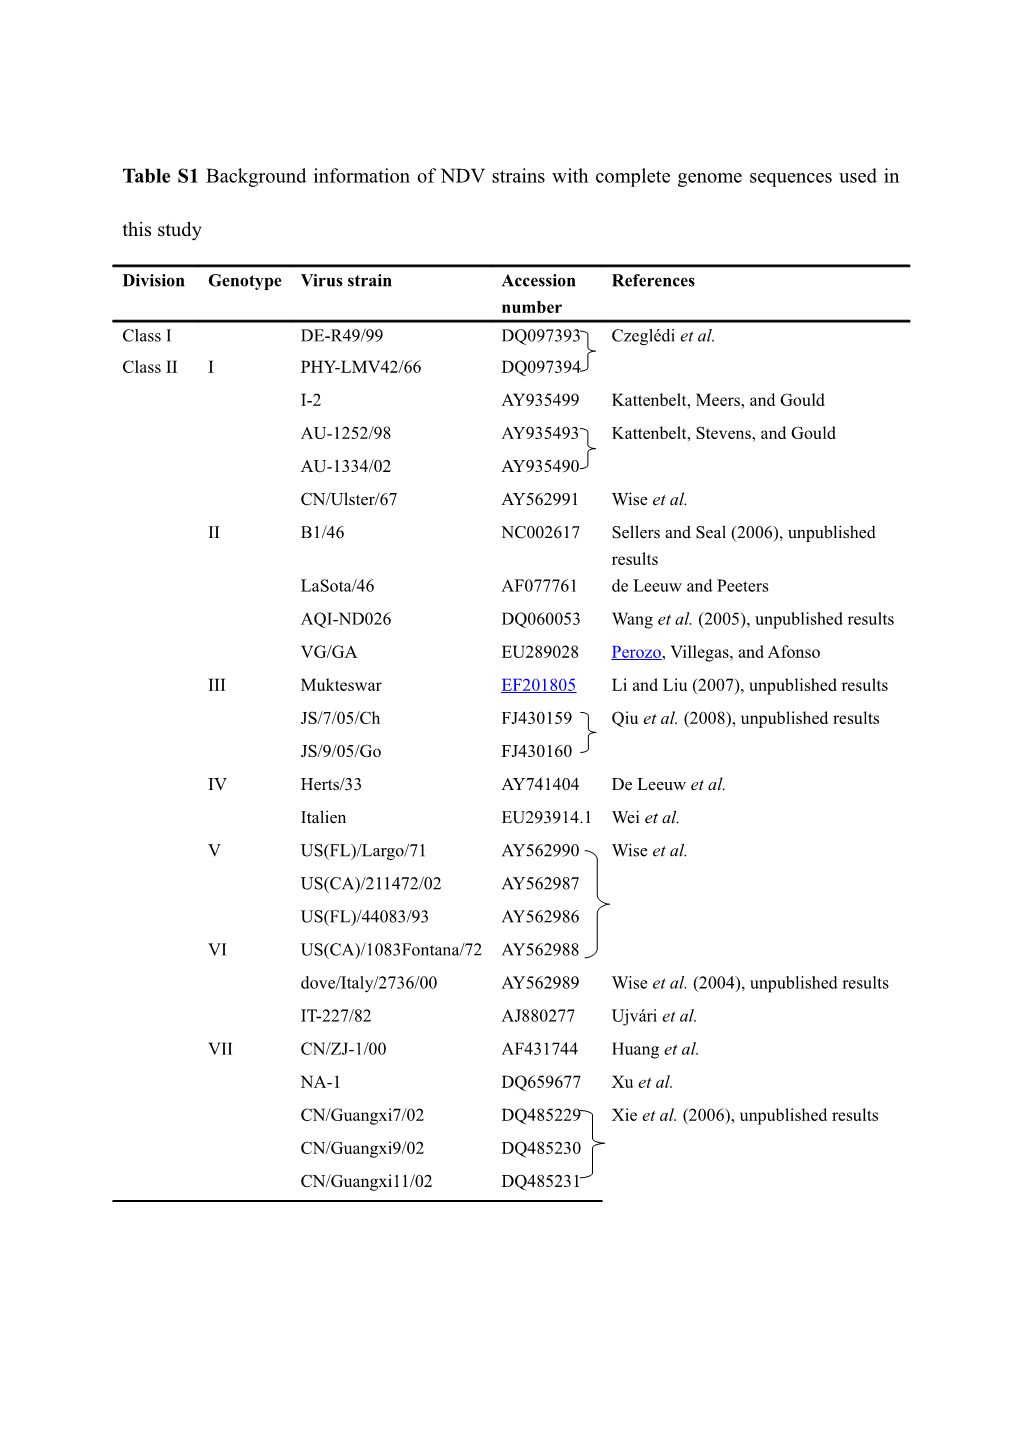 Table S1 Background Information of NDV Strains with Complete Genome Sequences Used in This Study